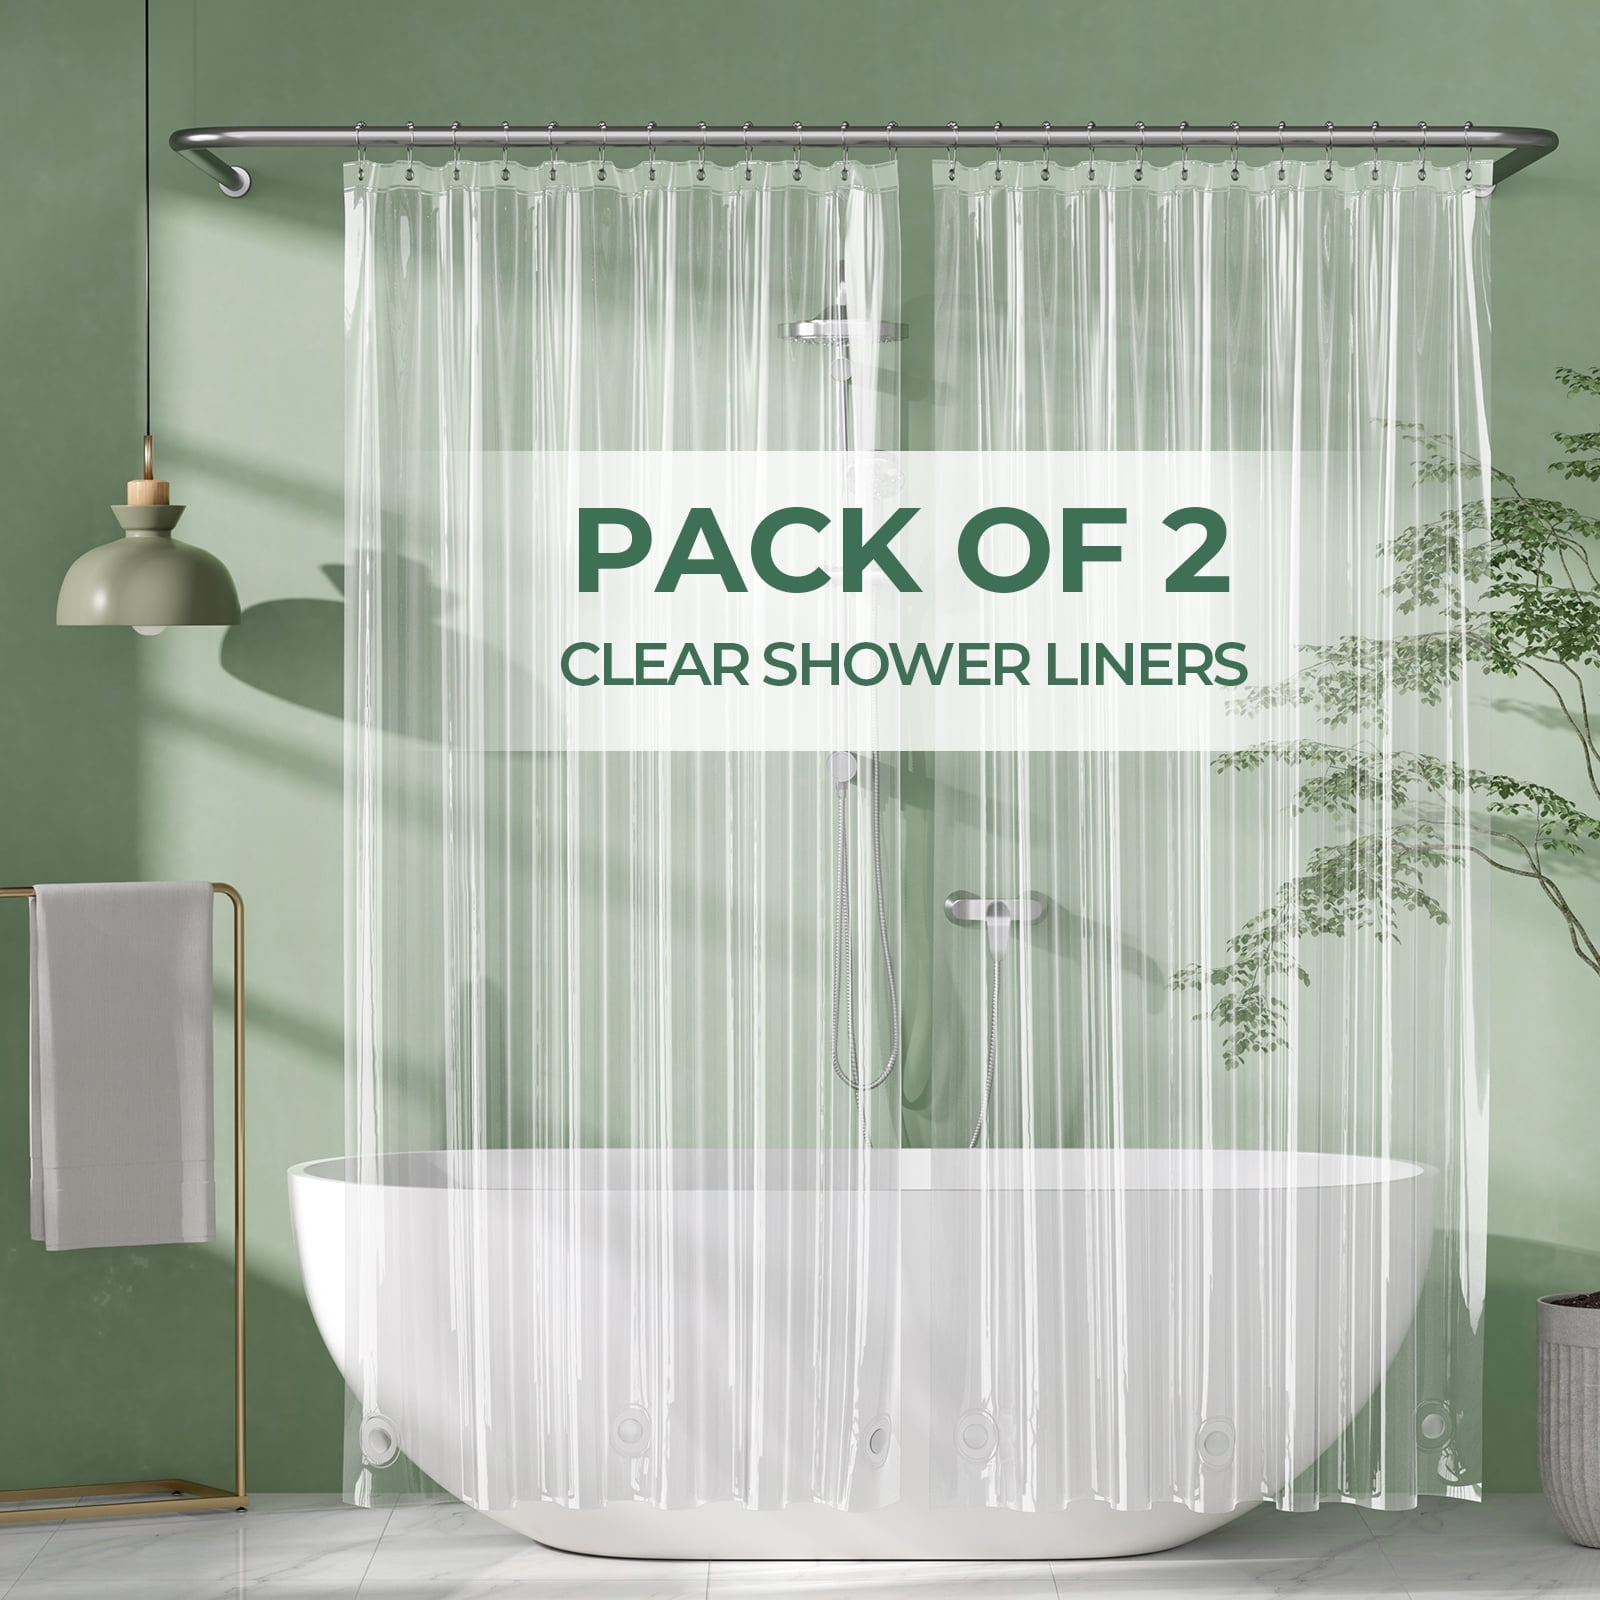 AmazerBath Shower Curtain Liner 2 Pack, 72 x 78 Inches PEVA Plastic Shower  Liner with 3 Weighted Stones and 12 Rustproof Metal Grommet, Lightweight